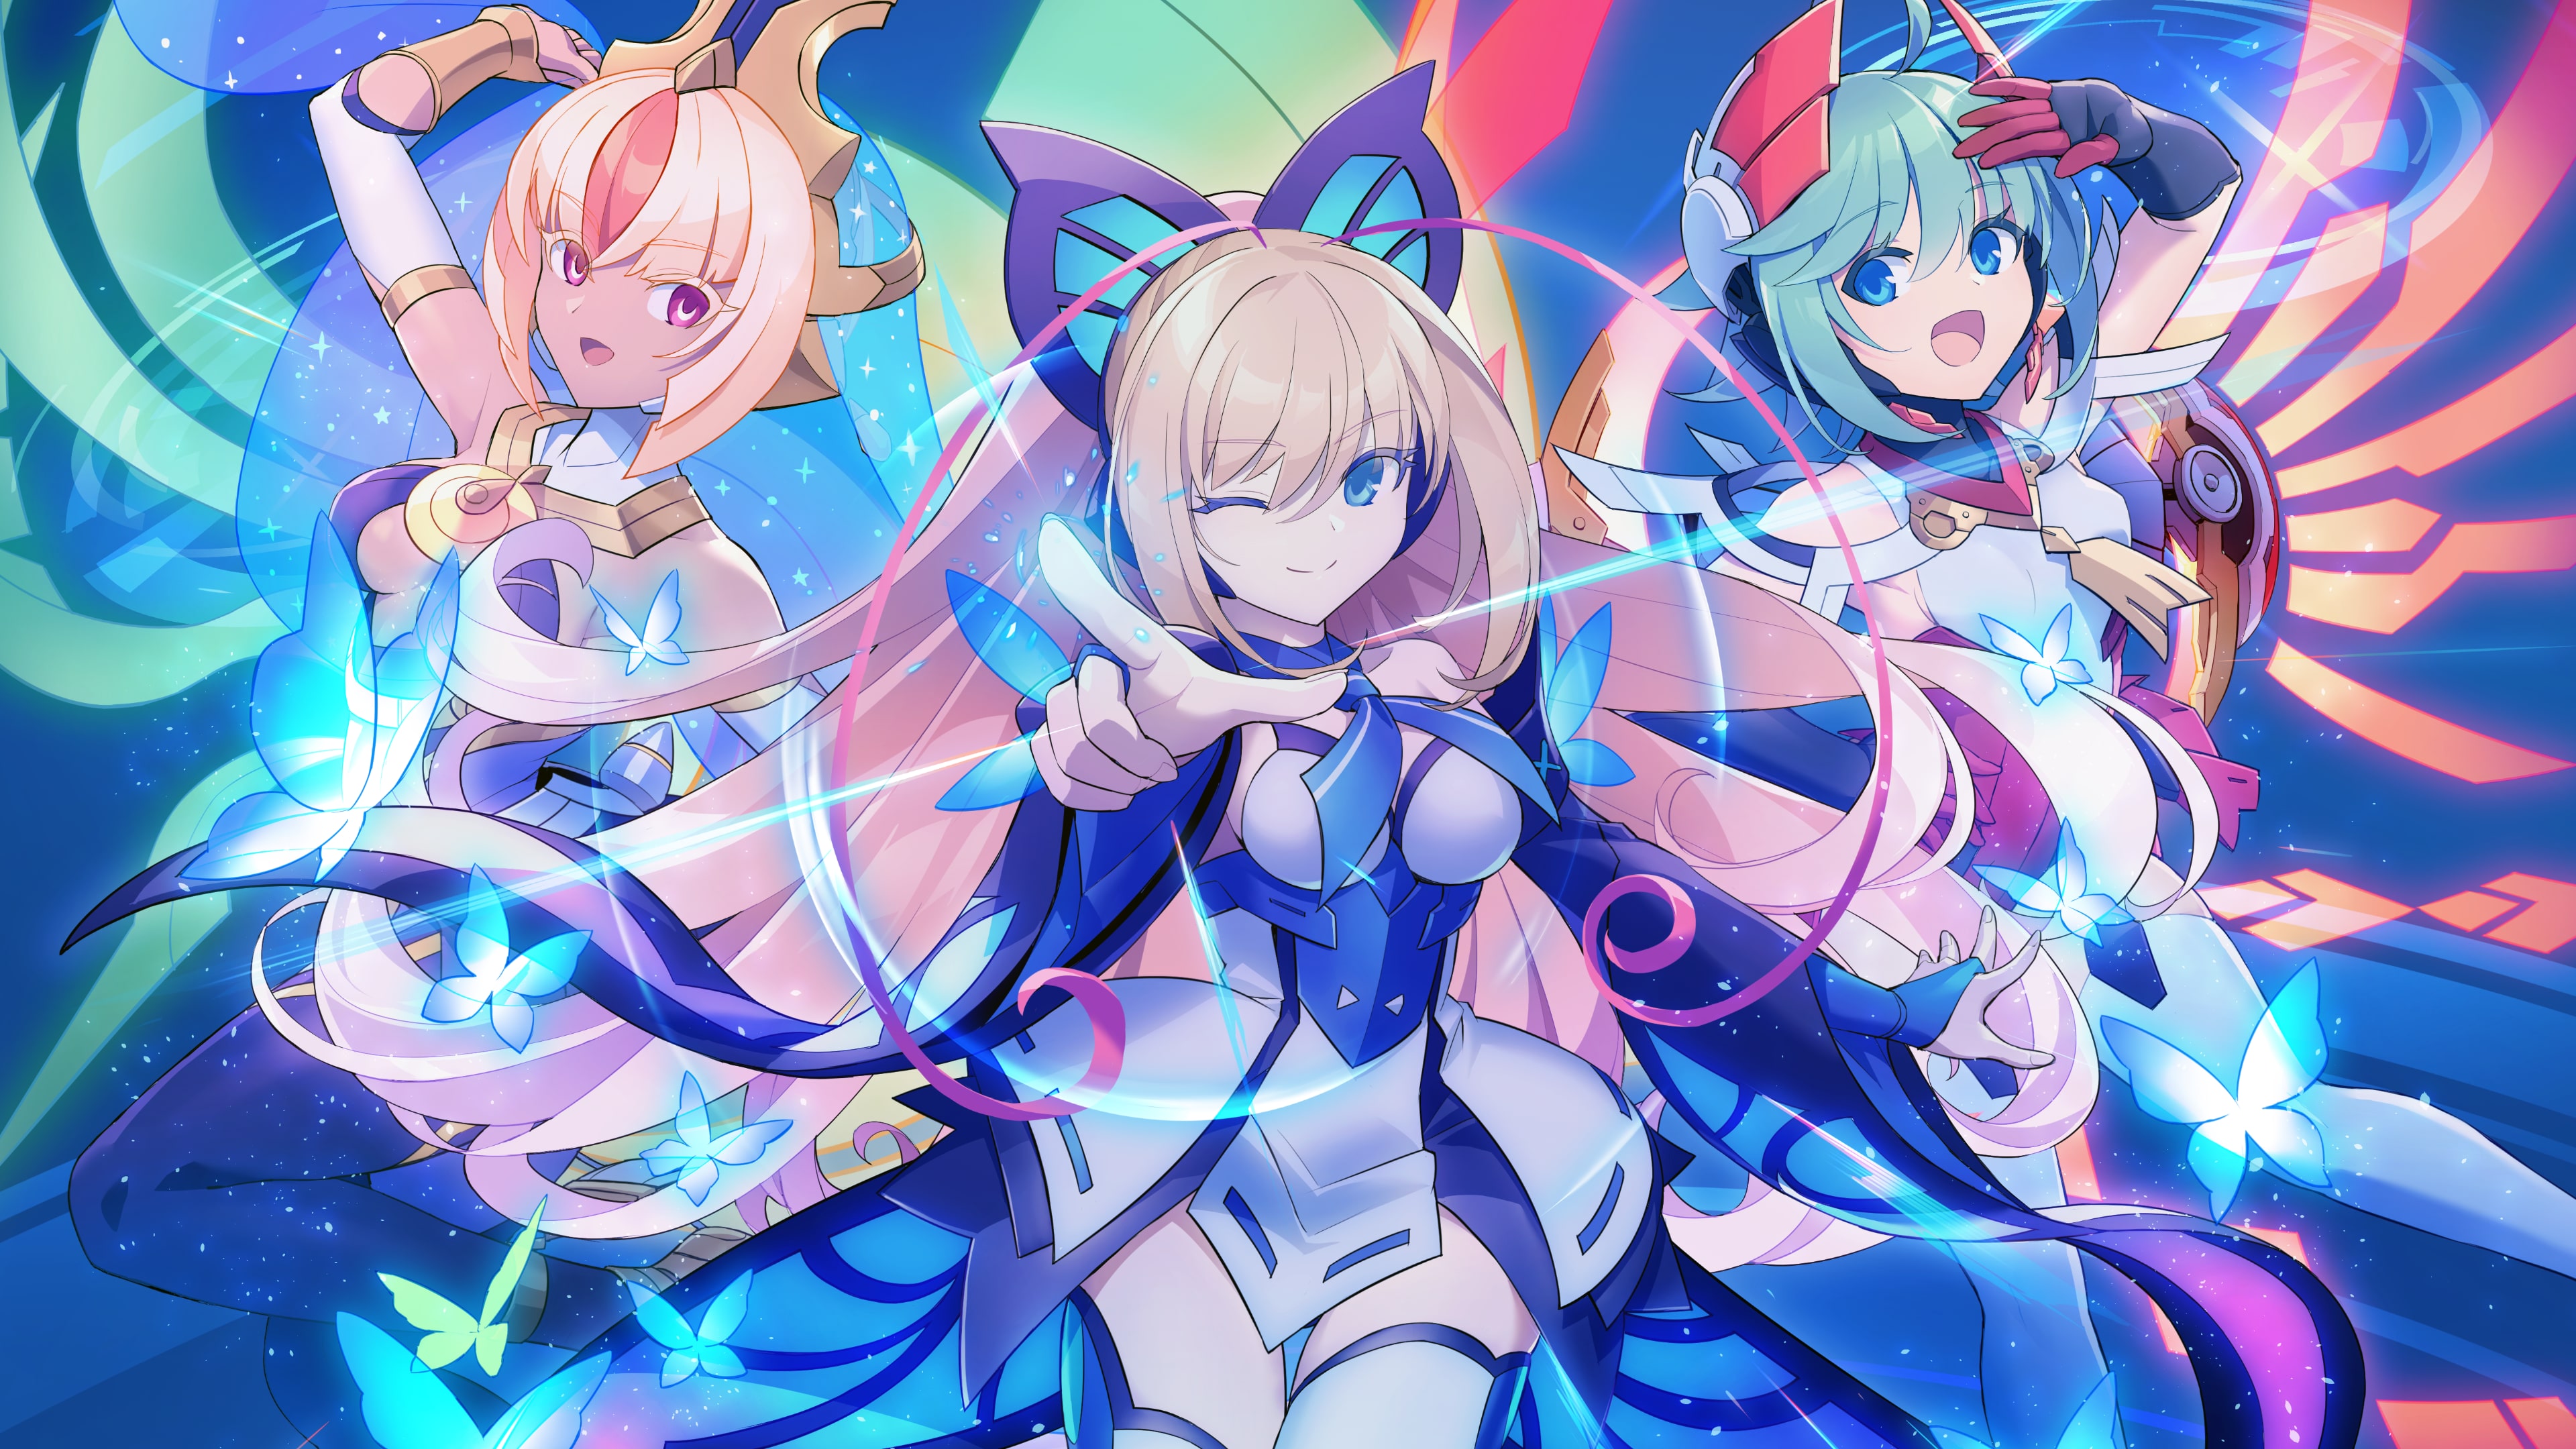 GUNVOLT RECORDS Cychronicle Song Pack 2 Lumen: ♪Pain From the Past ♪Stratosphere ♪Struggling to Dream ♪Twilight Skyline